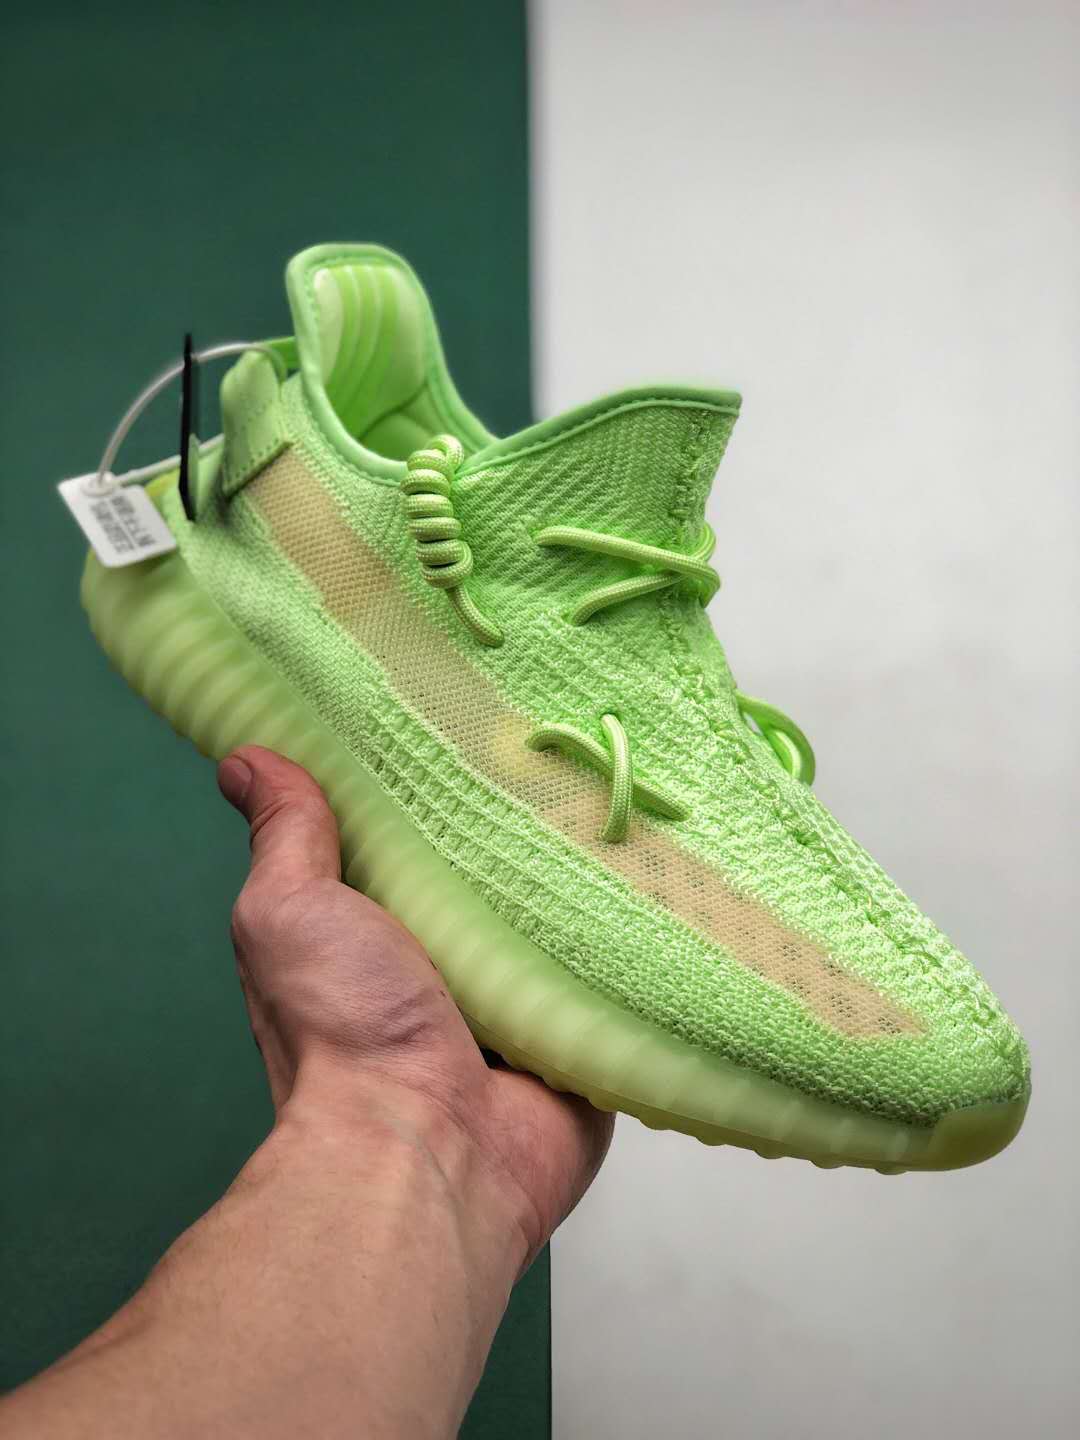 Adidas Yeezy Boost 350 V2 Glow EG5293: Stand Out with Reflective Style